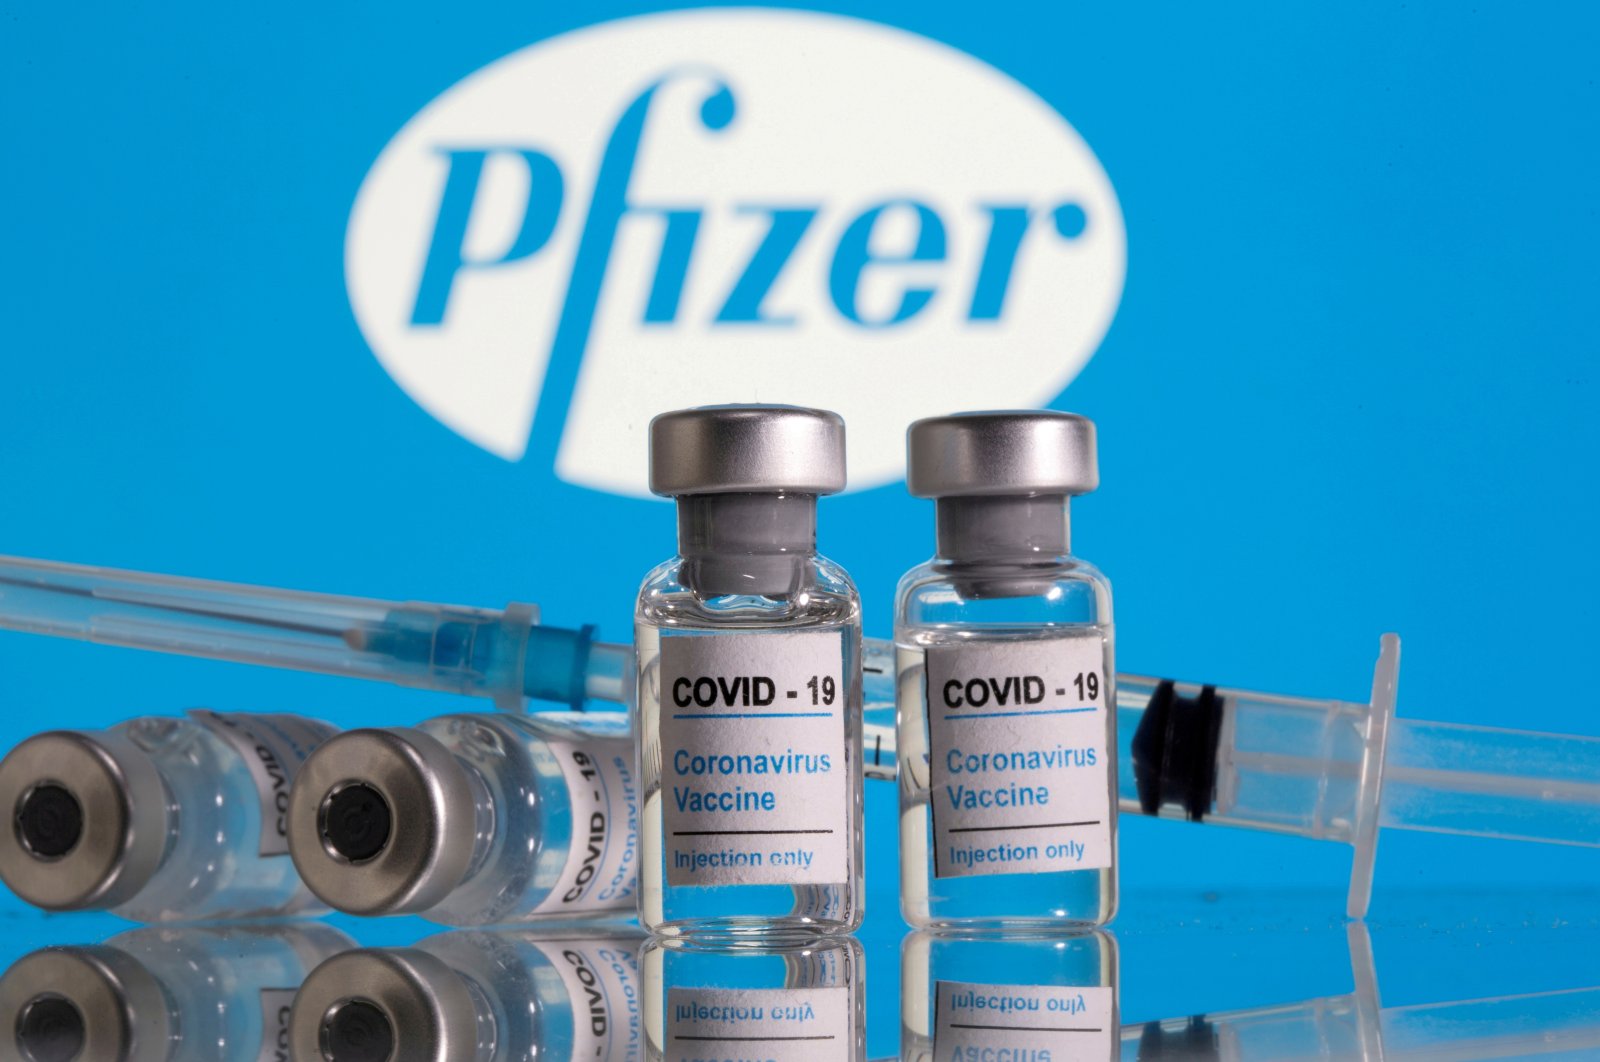 A file photo shows vials labeled "COVID-19 Coronavirus Vaccine" and a syringe in front of the Pfizer logo in this illustration taken Feb. 9, 2021. (Reuters Photo)